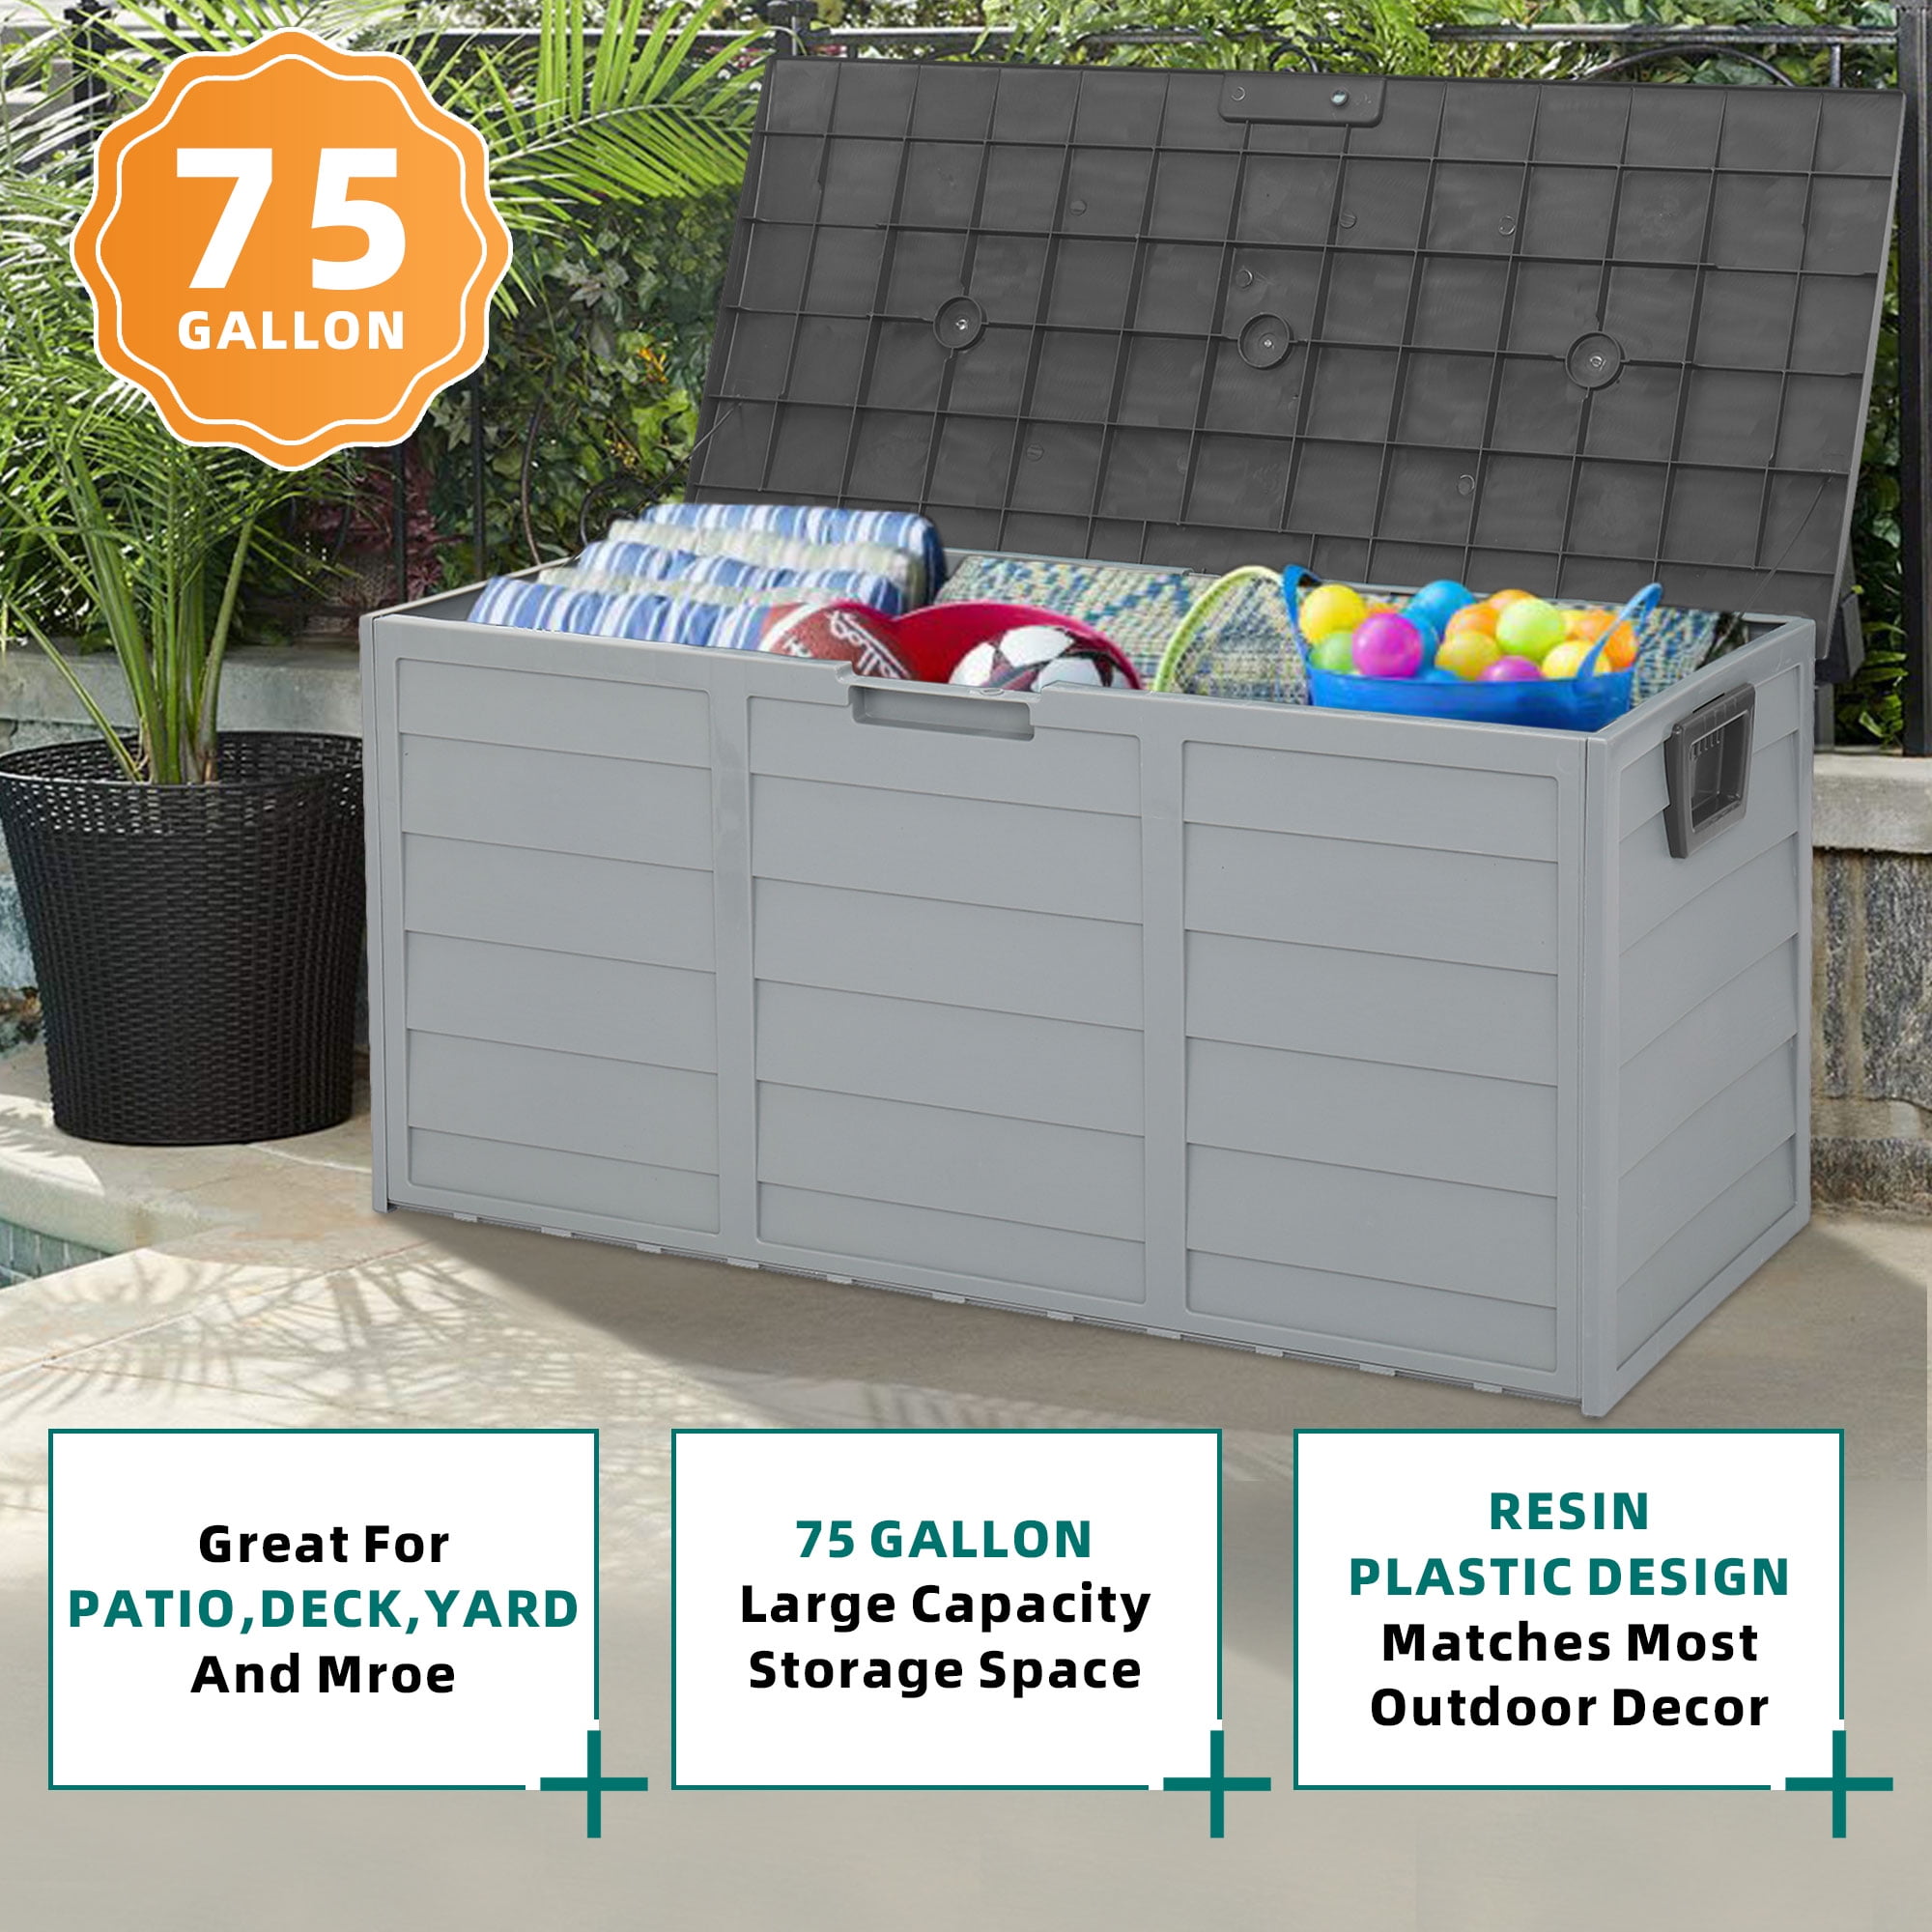 Seizeen 75 Gallon Resin Deck Box on Wheels, Patio Large Storage Cabinet,  Outdoor Waterproof Storage Chest, Storage Container for Outside Furniture